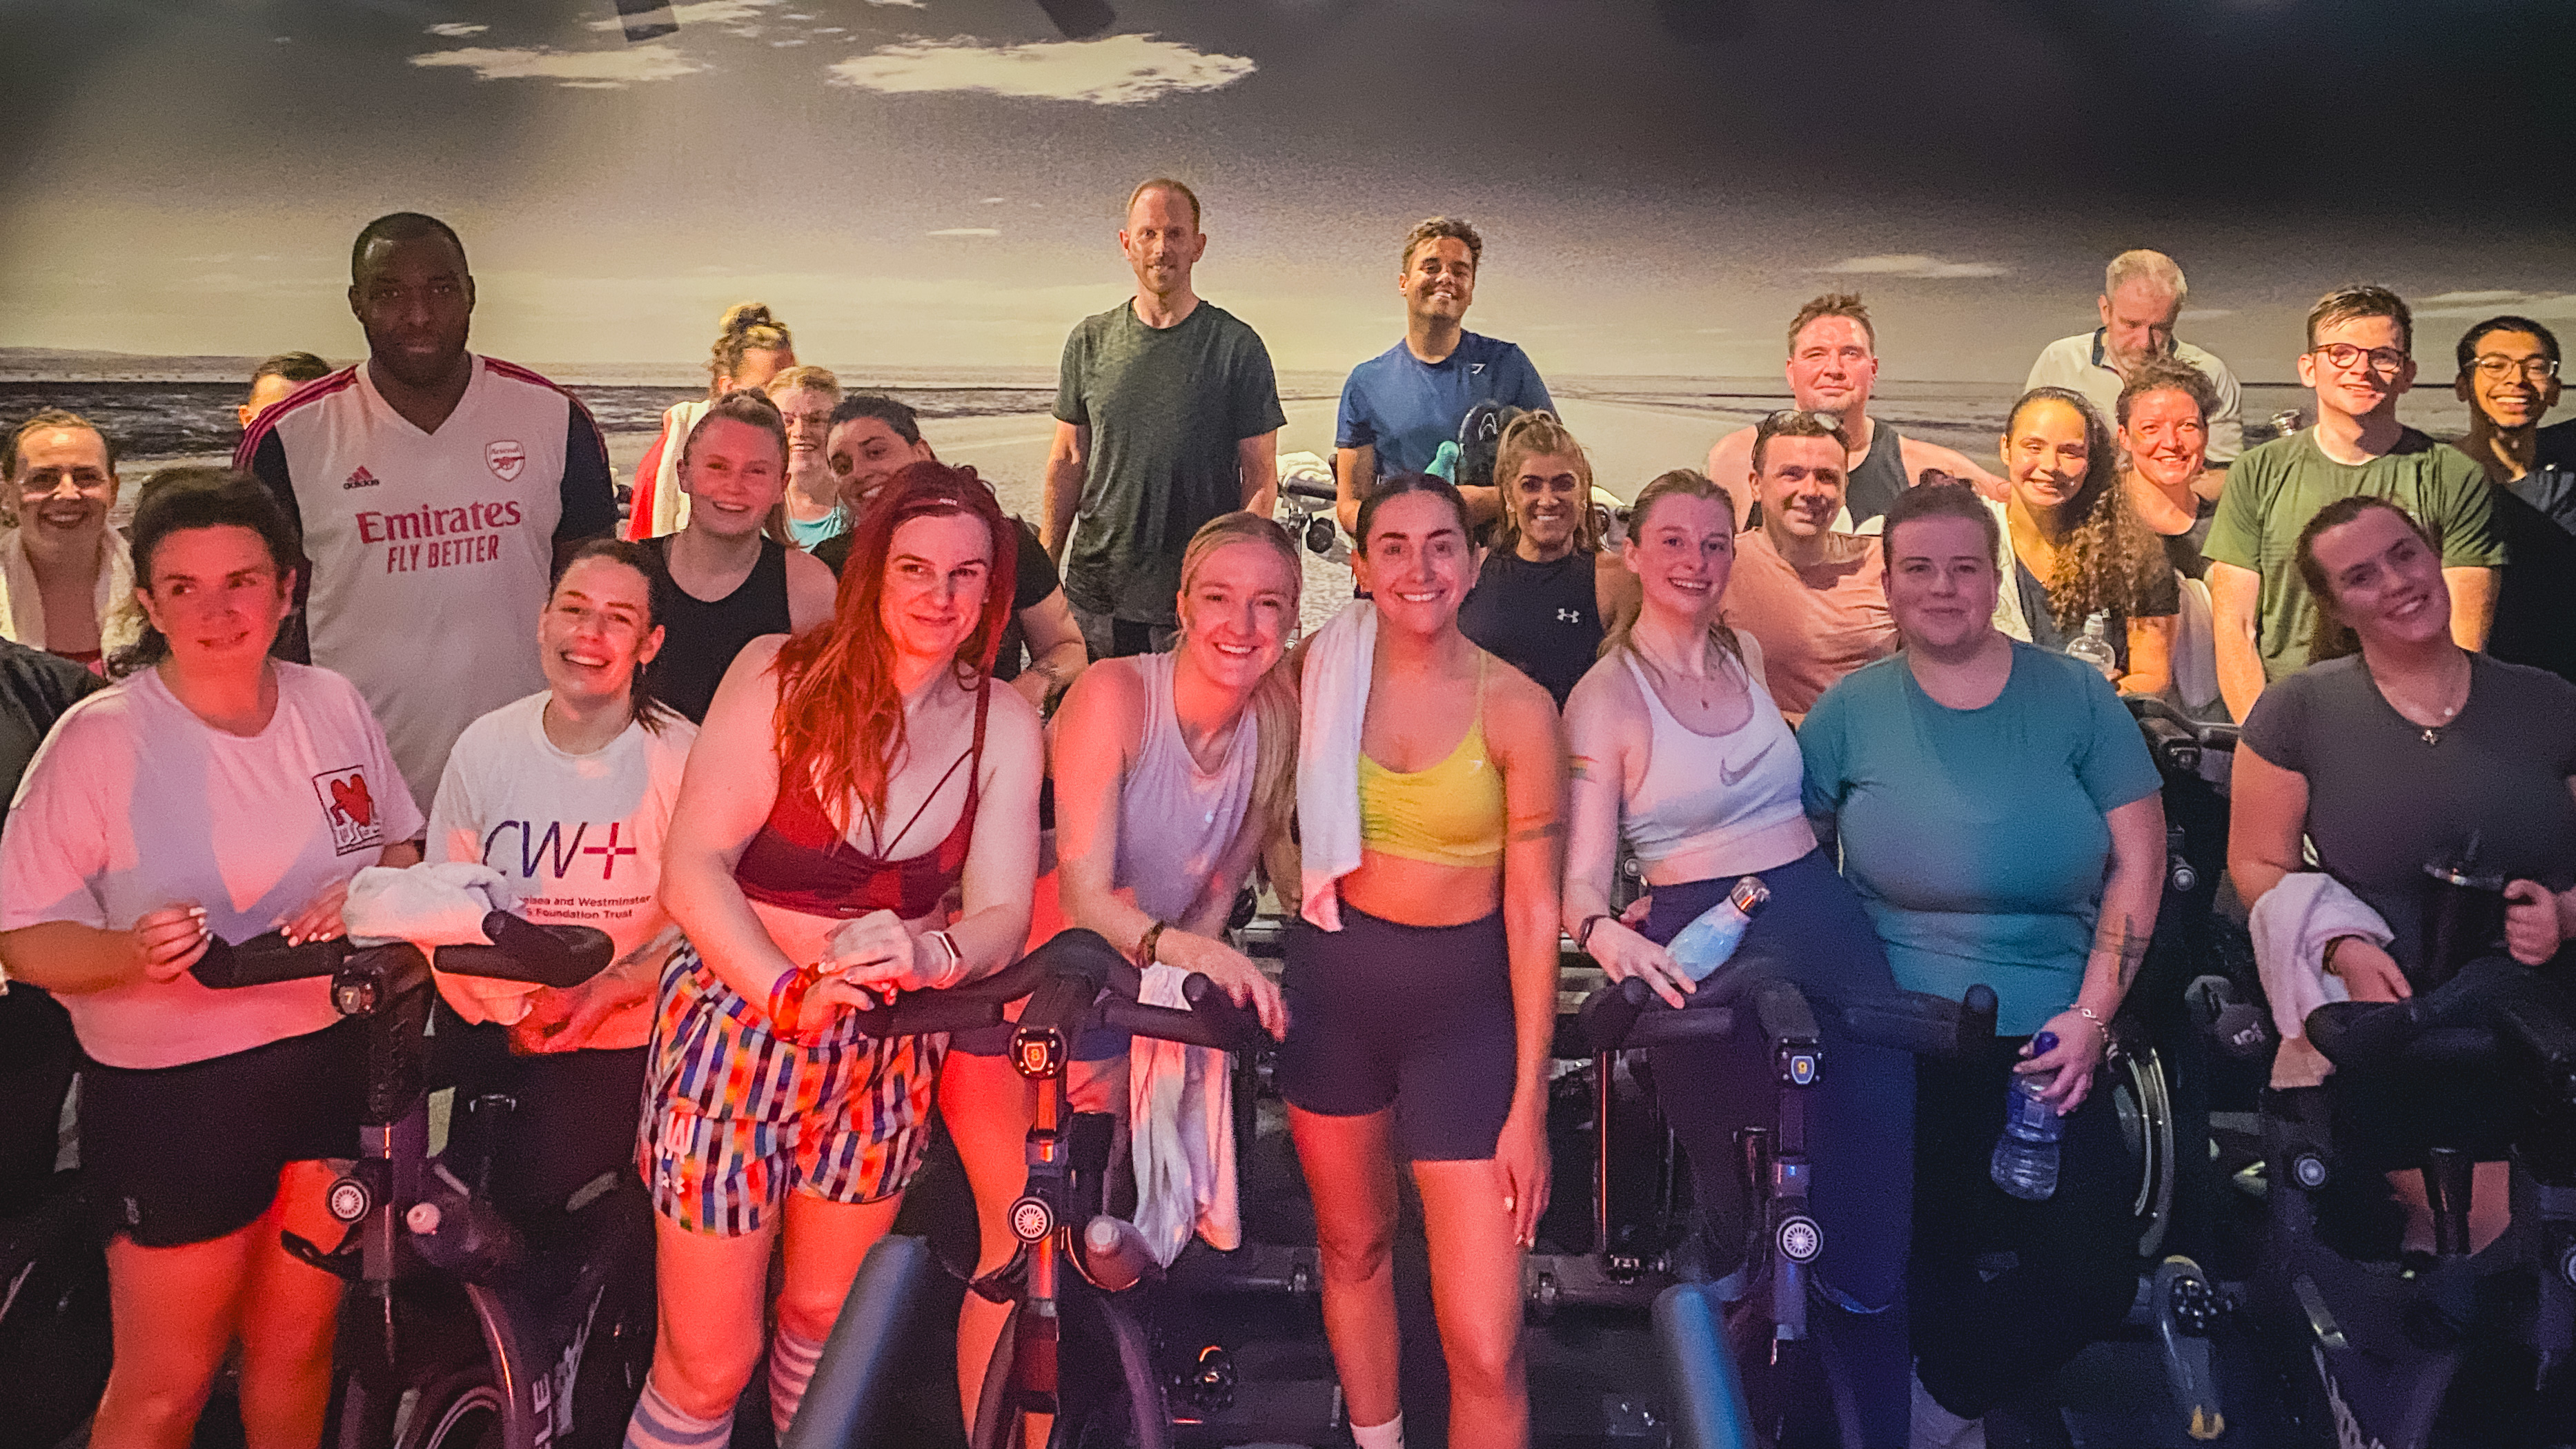 56 Dean Street joins forces with SoulCycle to mark Pride month with ‘Ride for Pride’ fundraiser